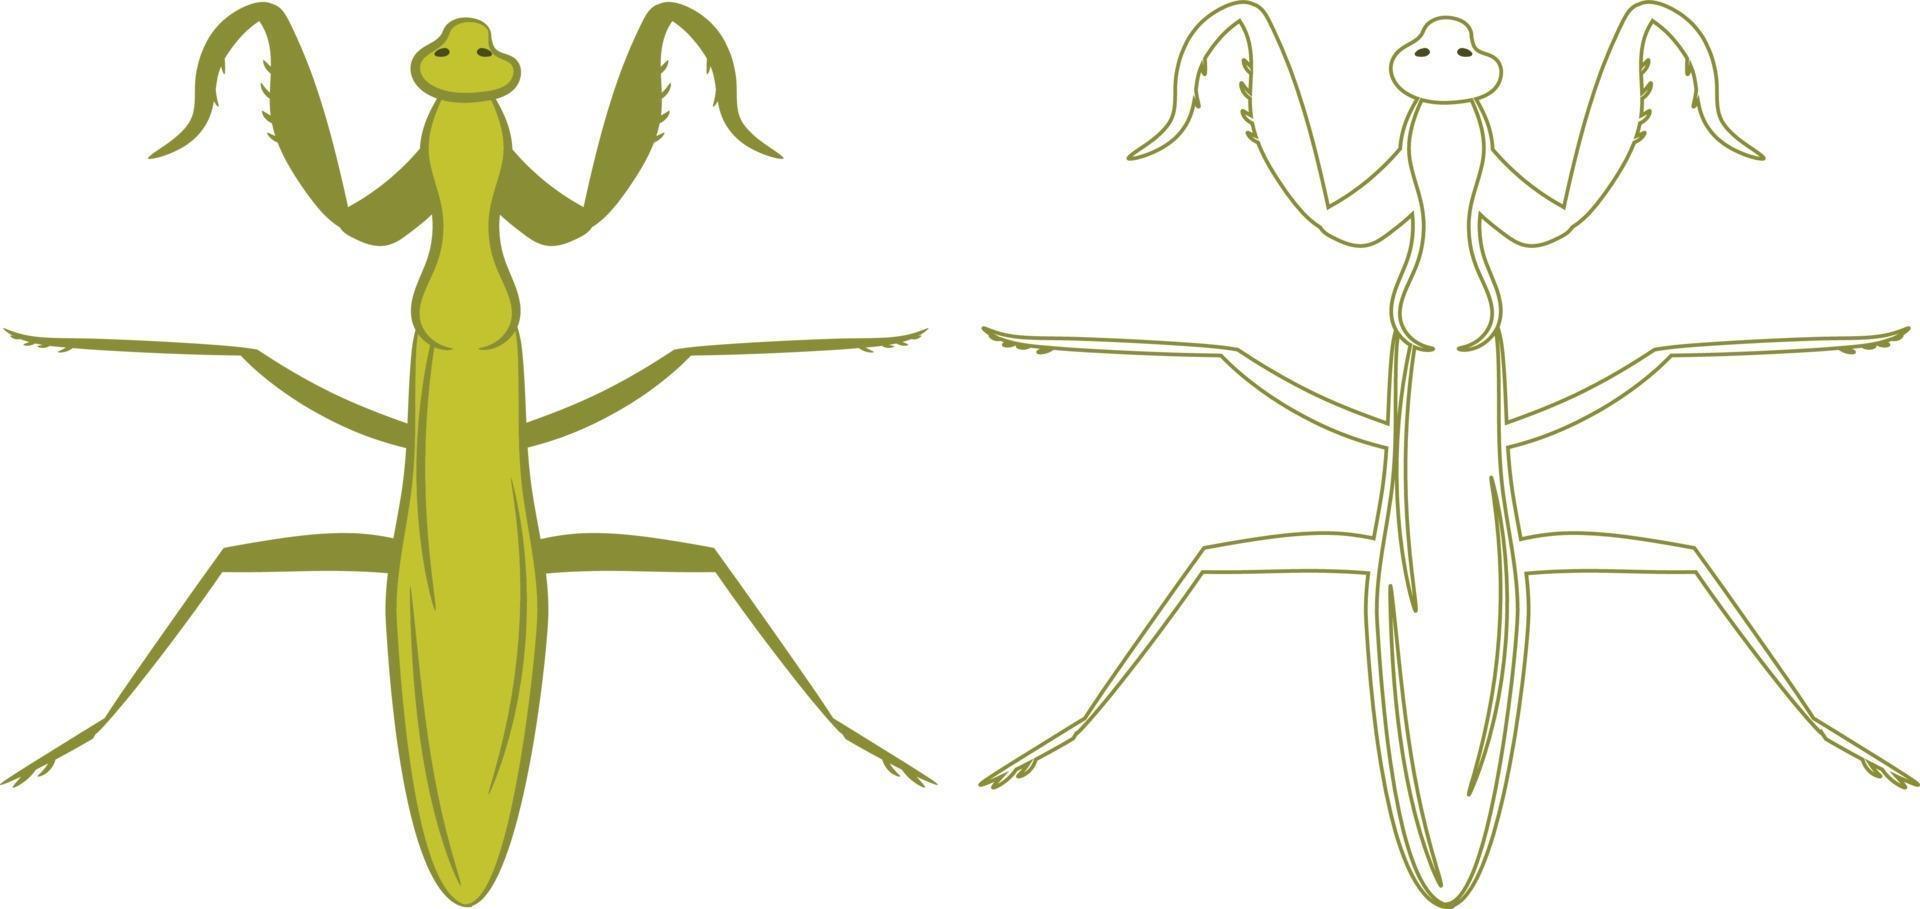 Mantis Mantidae Mantodea Illustration Fill and Outline vector